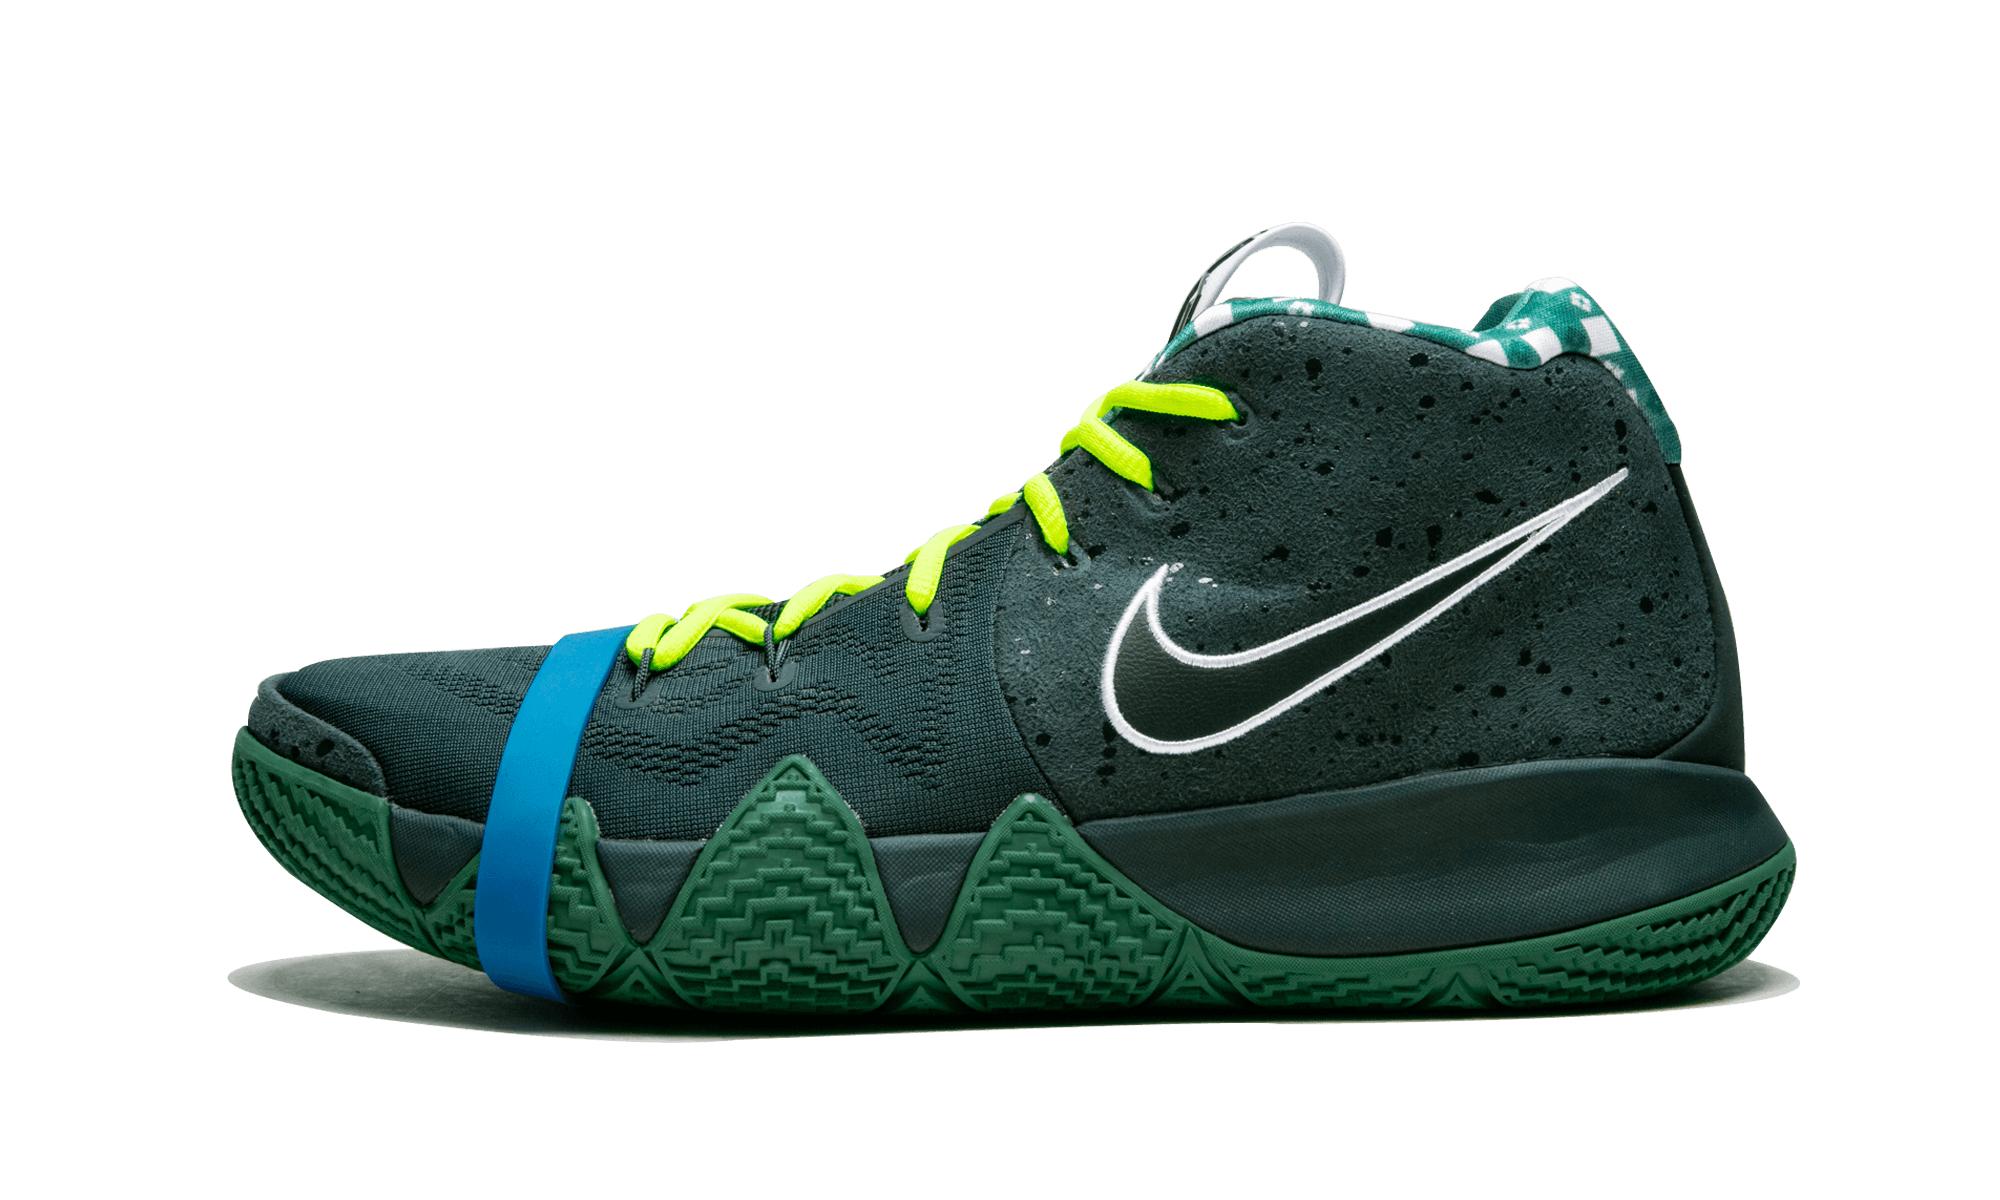 kyrie 4 green lobster for sale